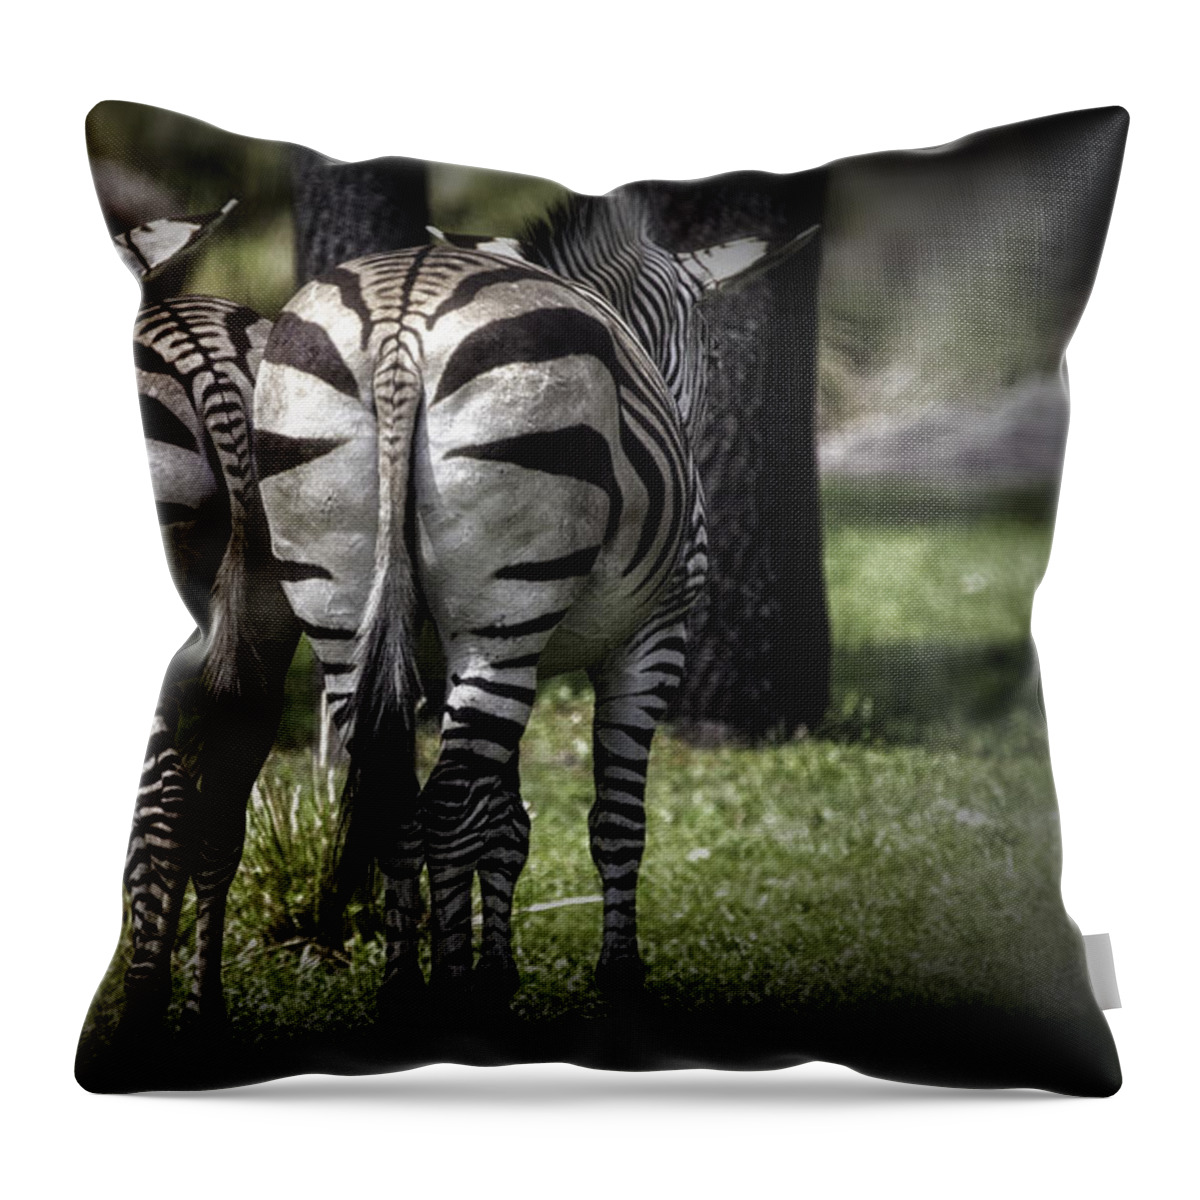 Zebras Throw Pillow featuring the photograph Cheek To Cheek by Mary Lou Chmura